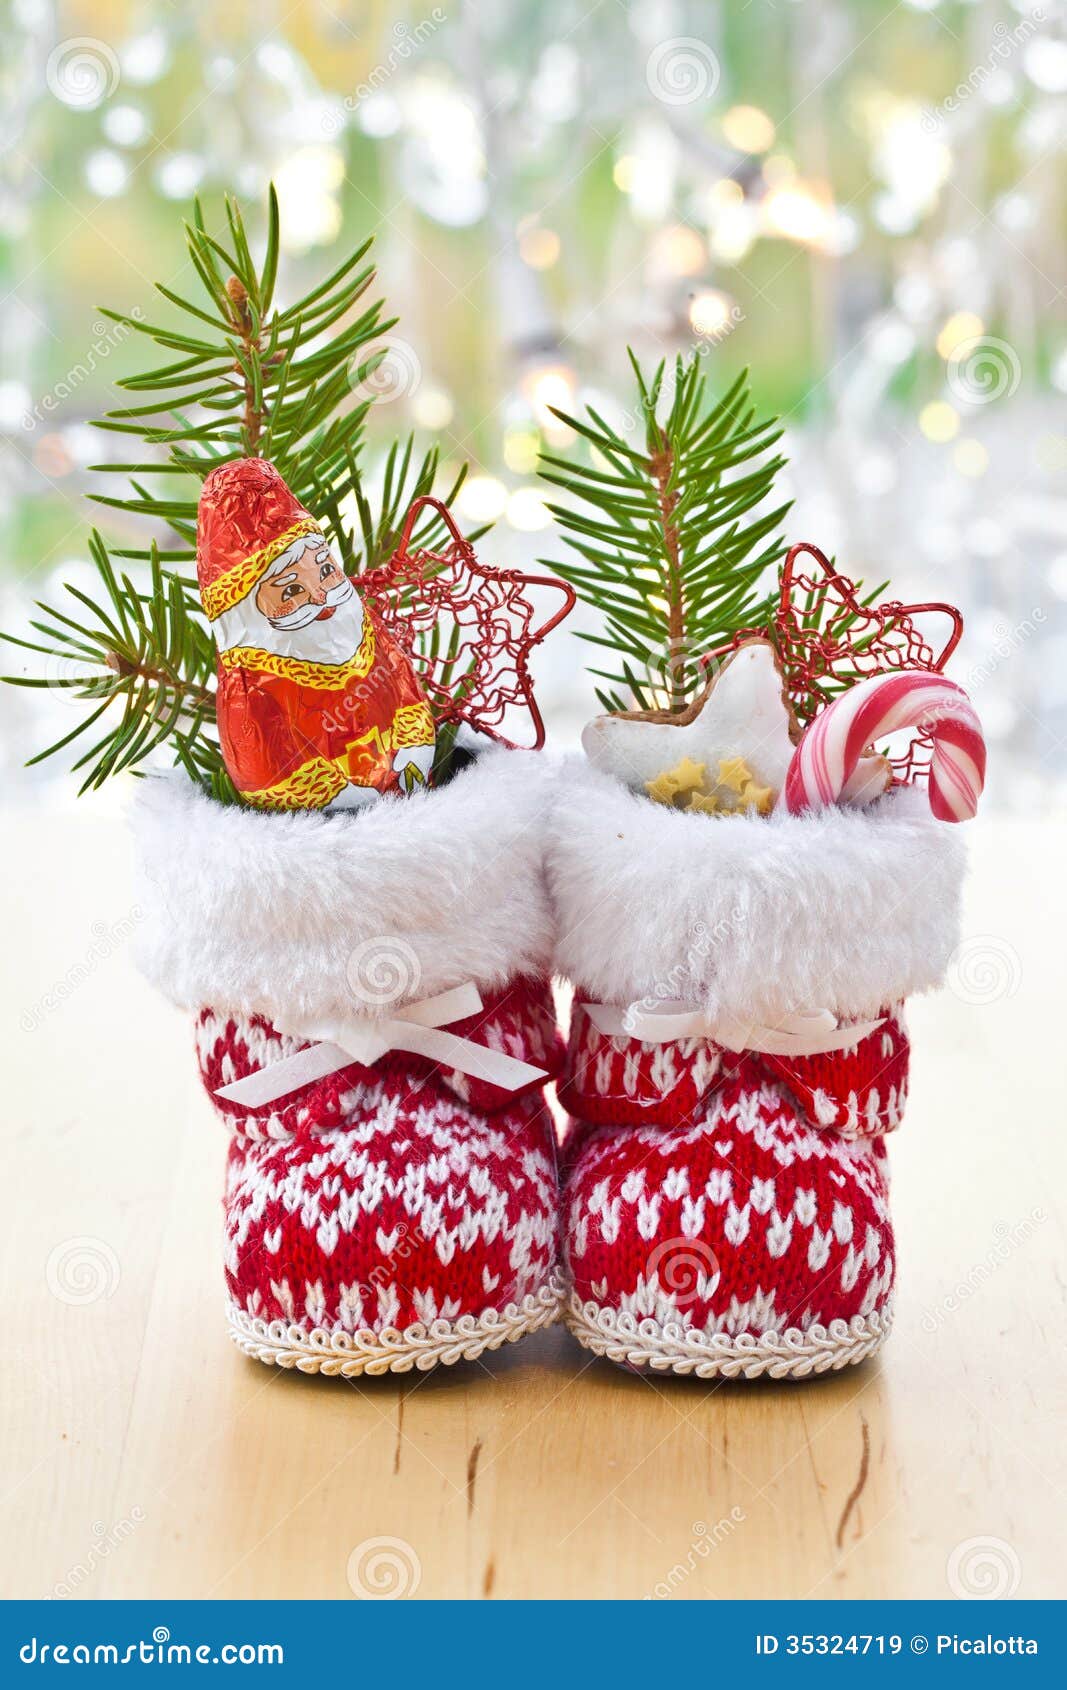 Old Hiking Boots Filled With Sweets Gifts And Christmas Decoration